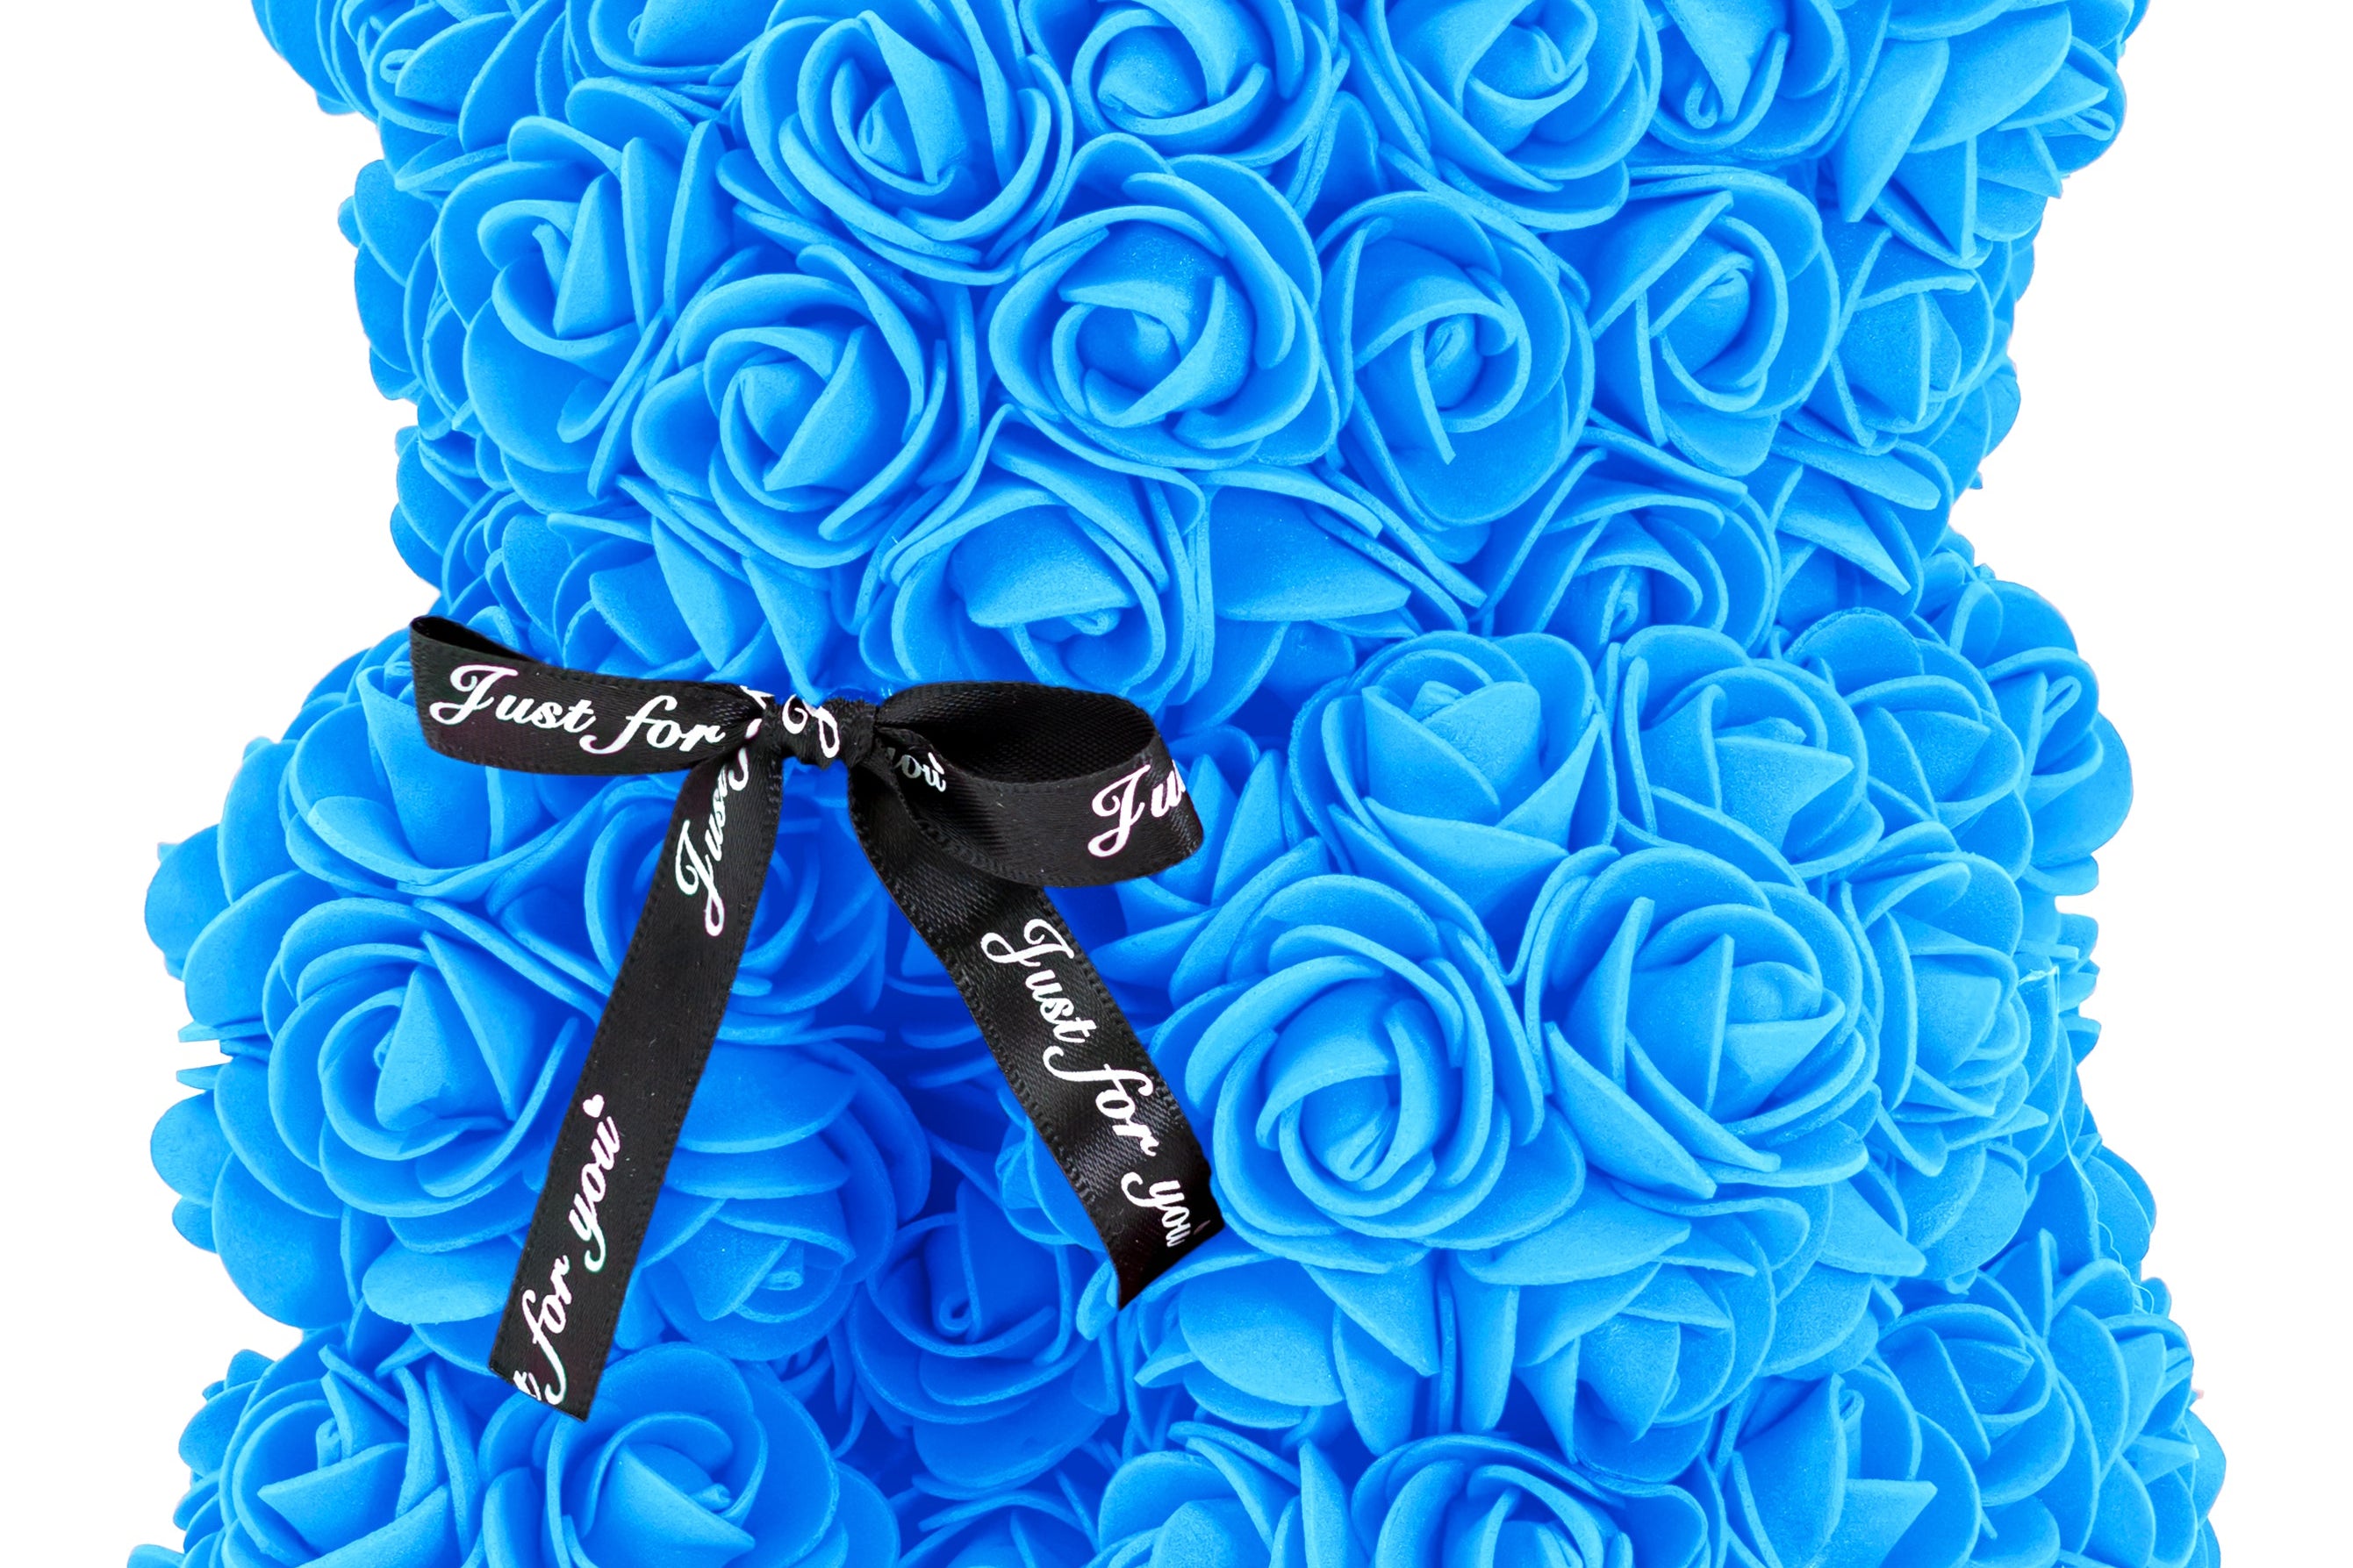 A bear shaped product covered in foam roses in the color blue.